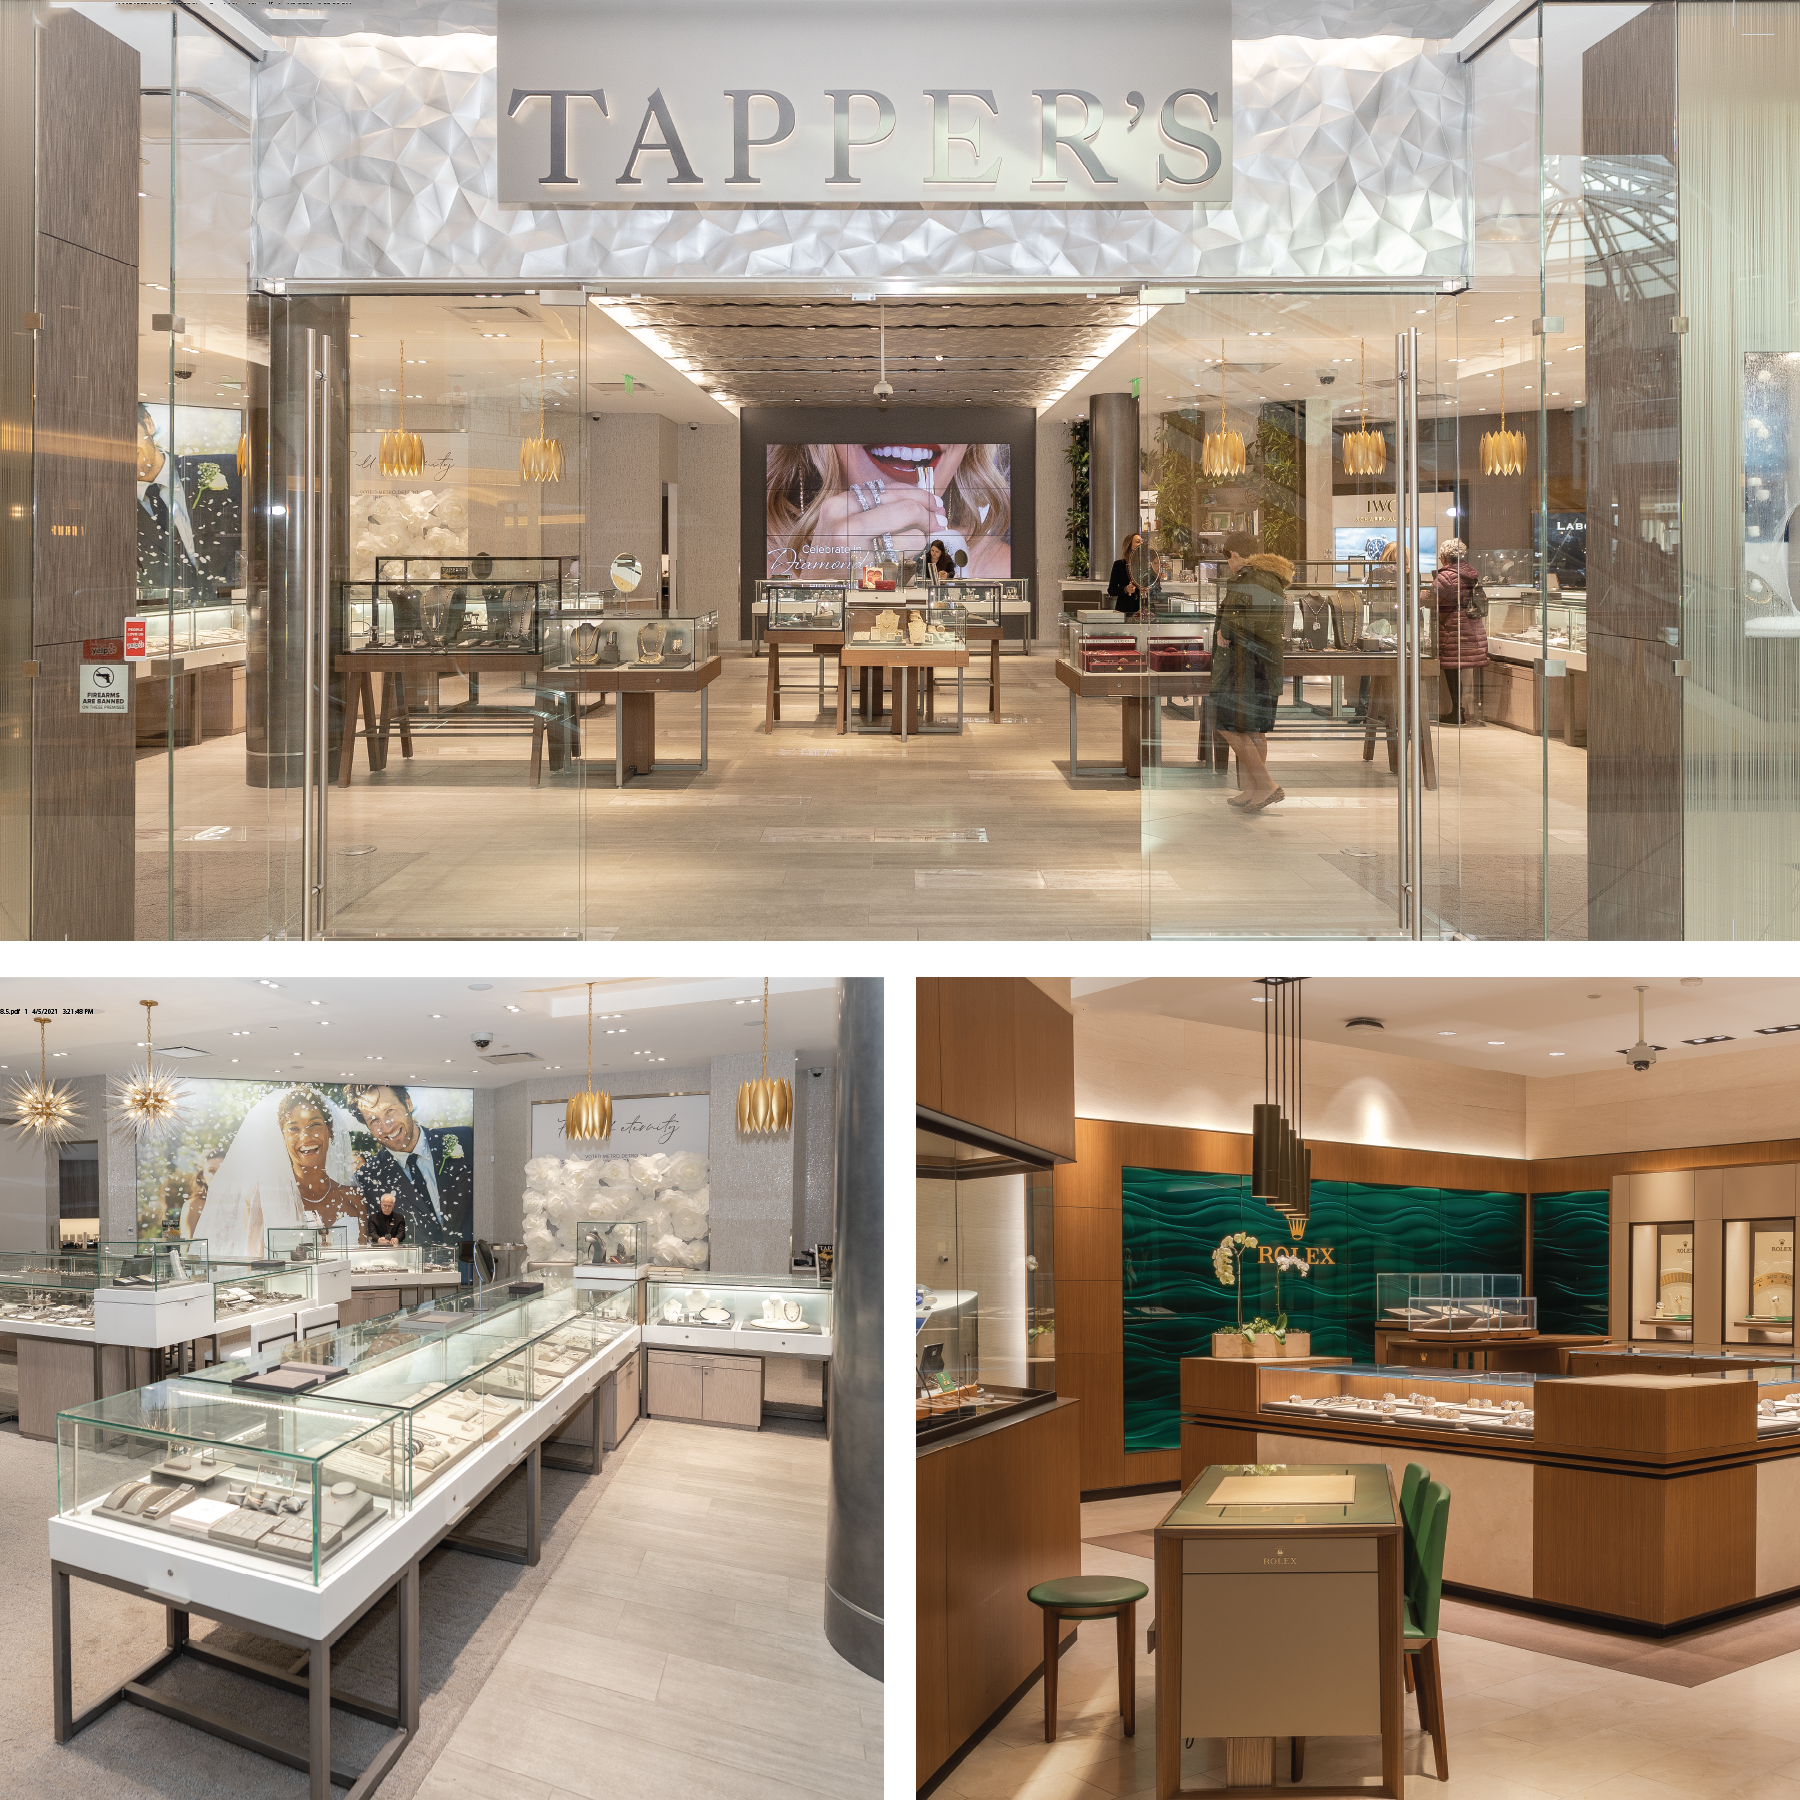 Tapper's Somerset Collection 2017 Remodeled Showroom with a Rolex Shop in Shop